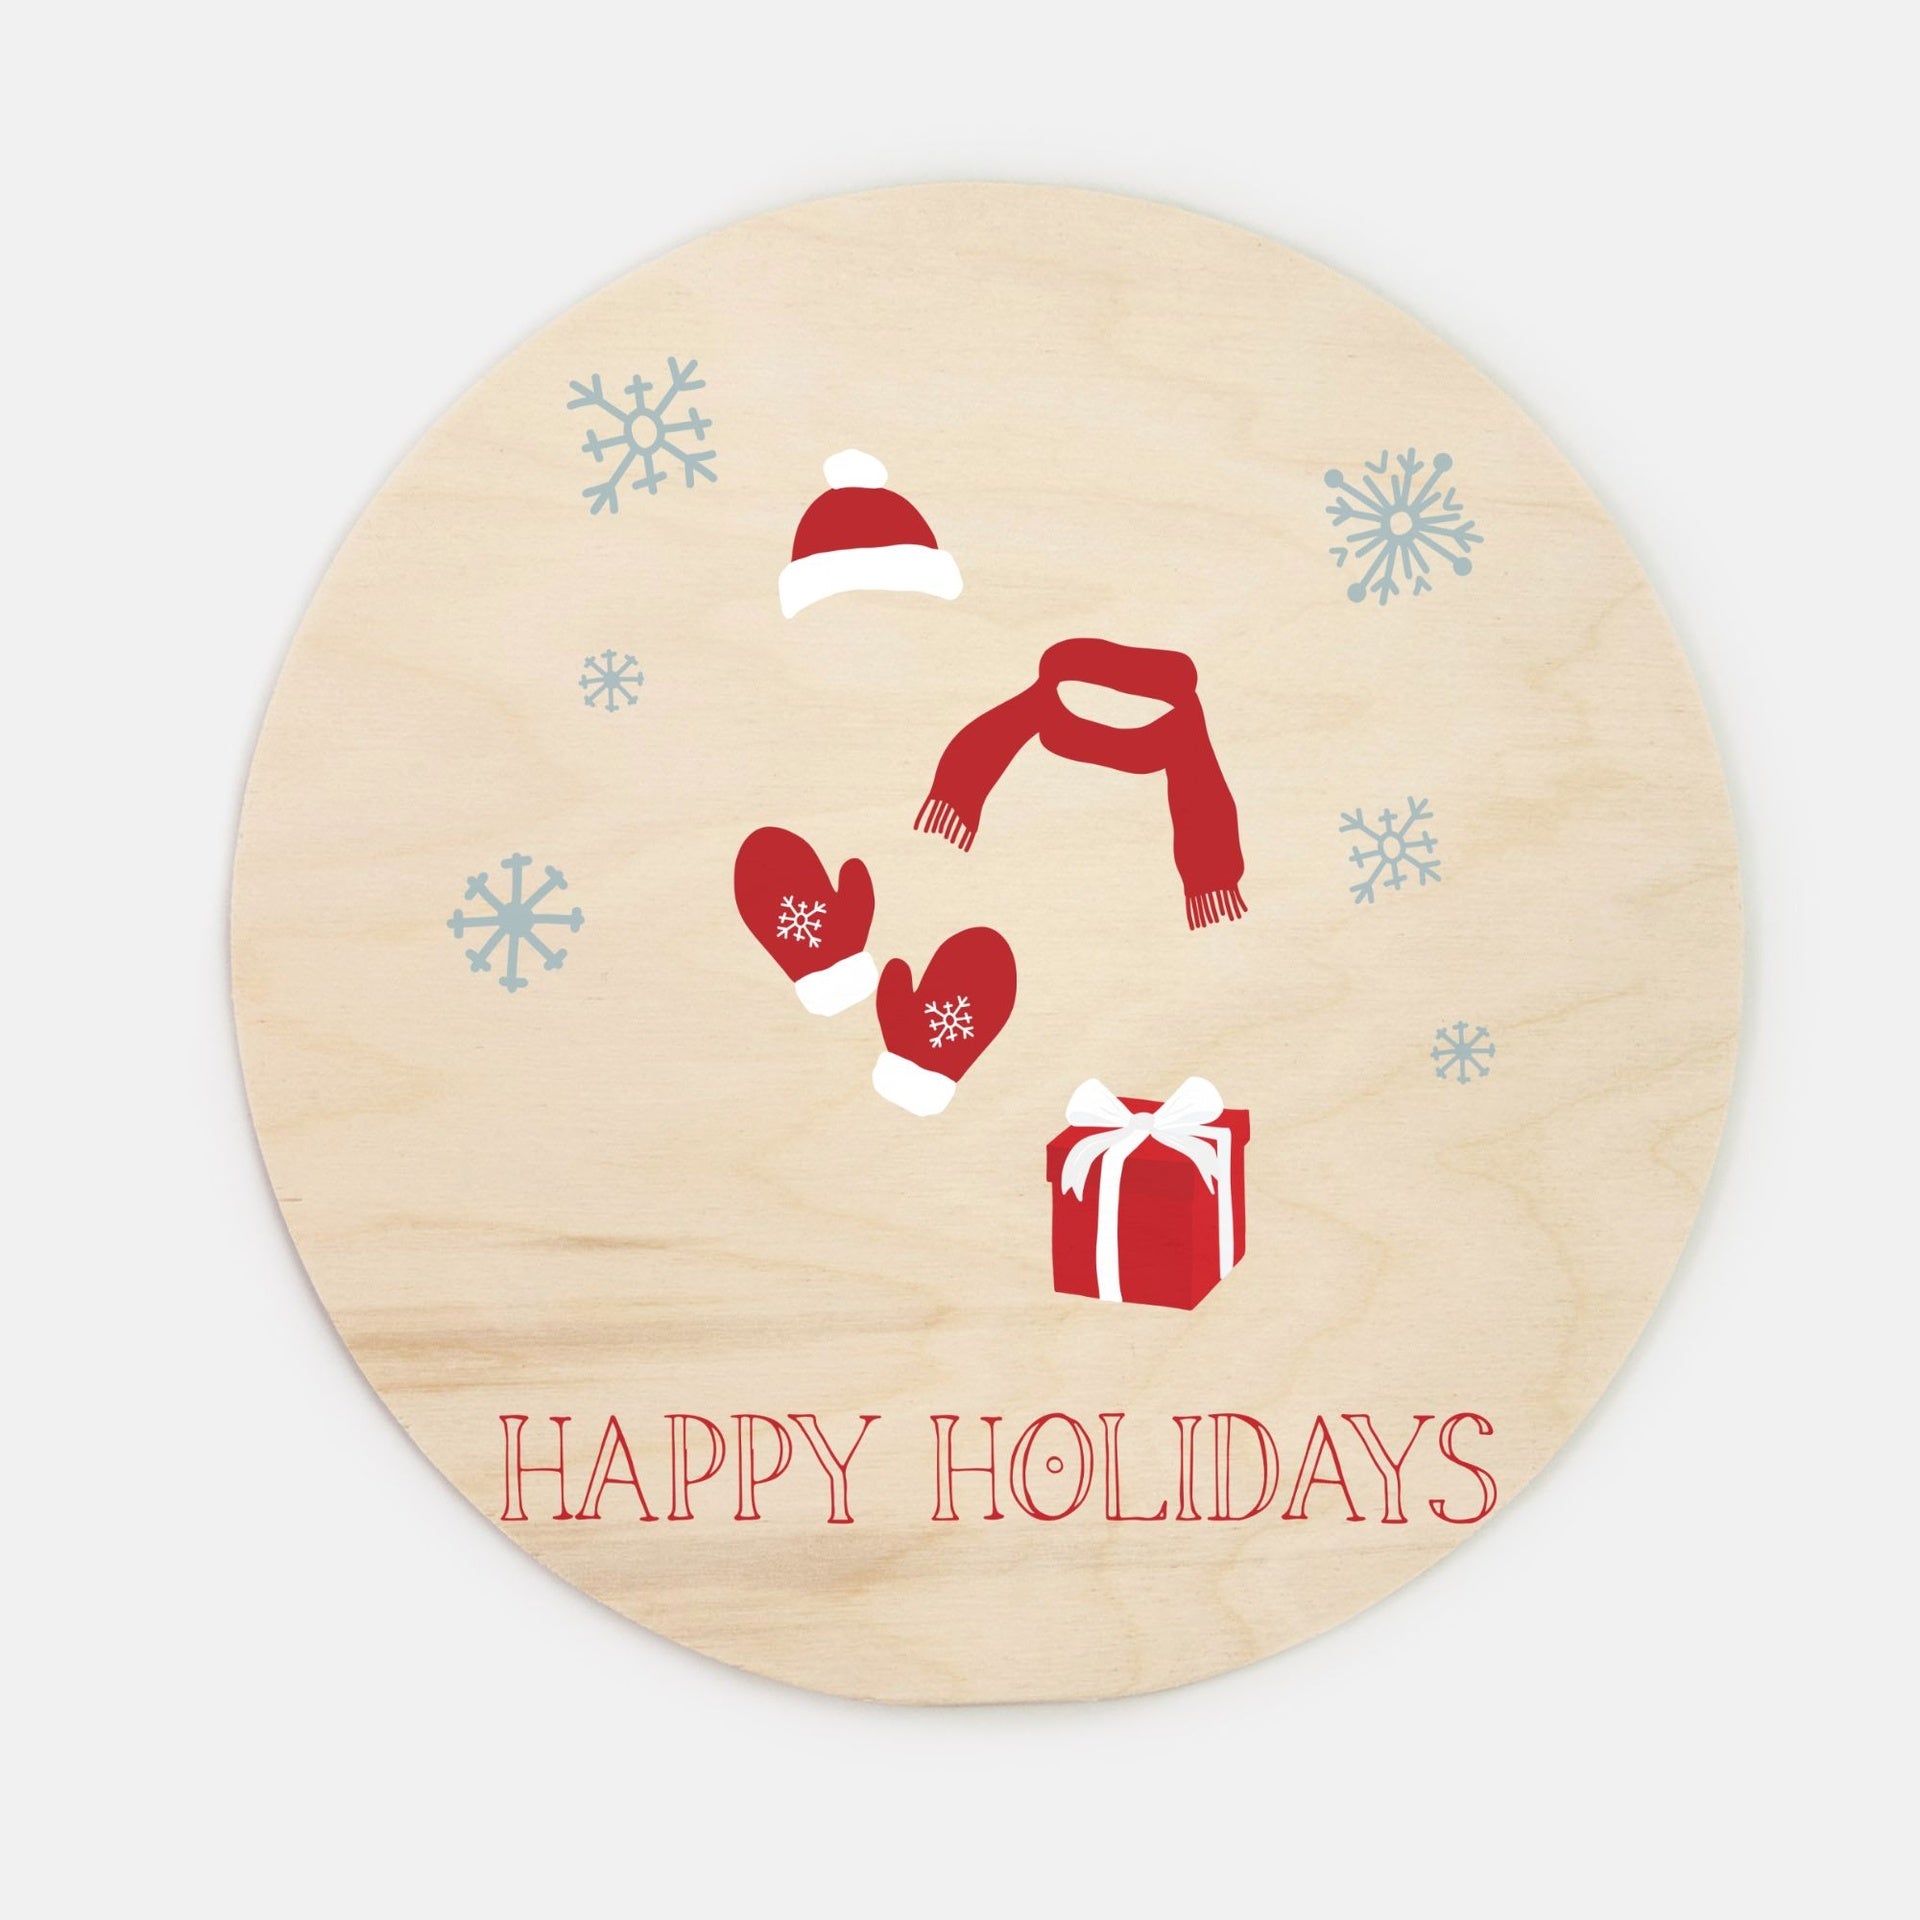 10" Round Wood Sign - Red Happy Holidays